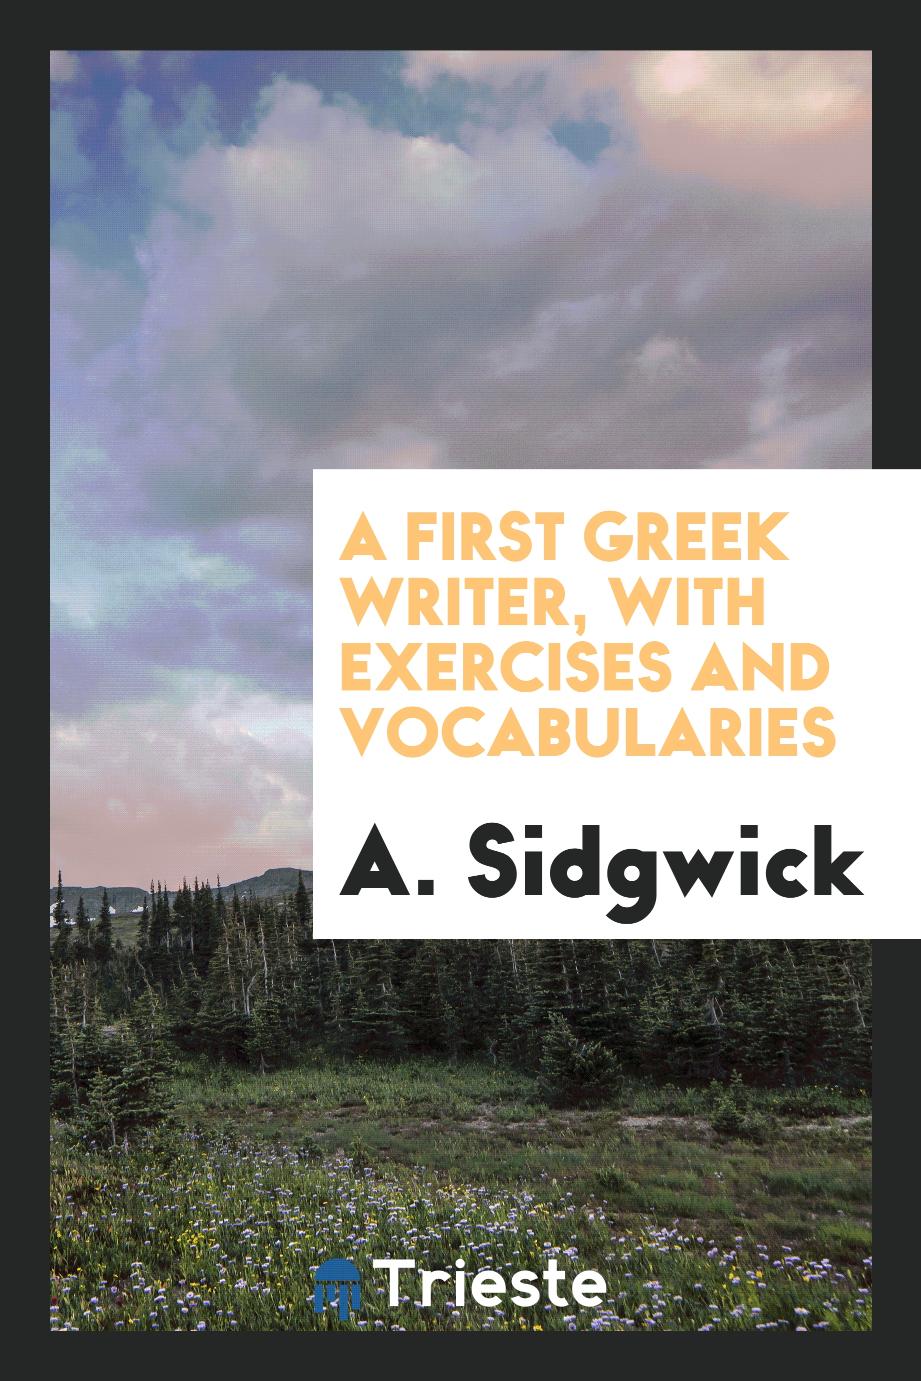 A. Sidgwick - A First Greek Writer, with Exercises and Vocabularies